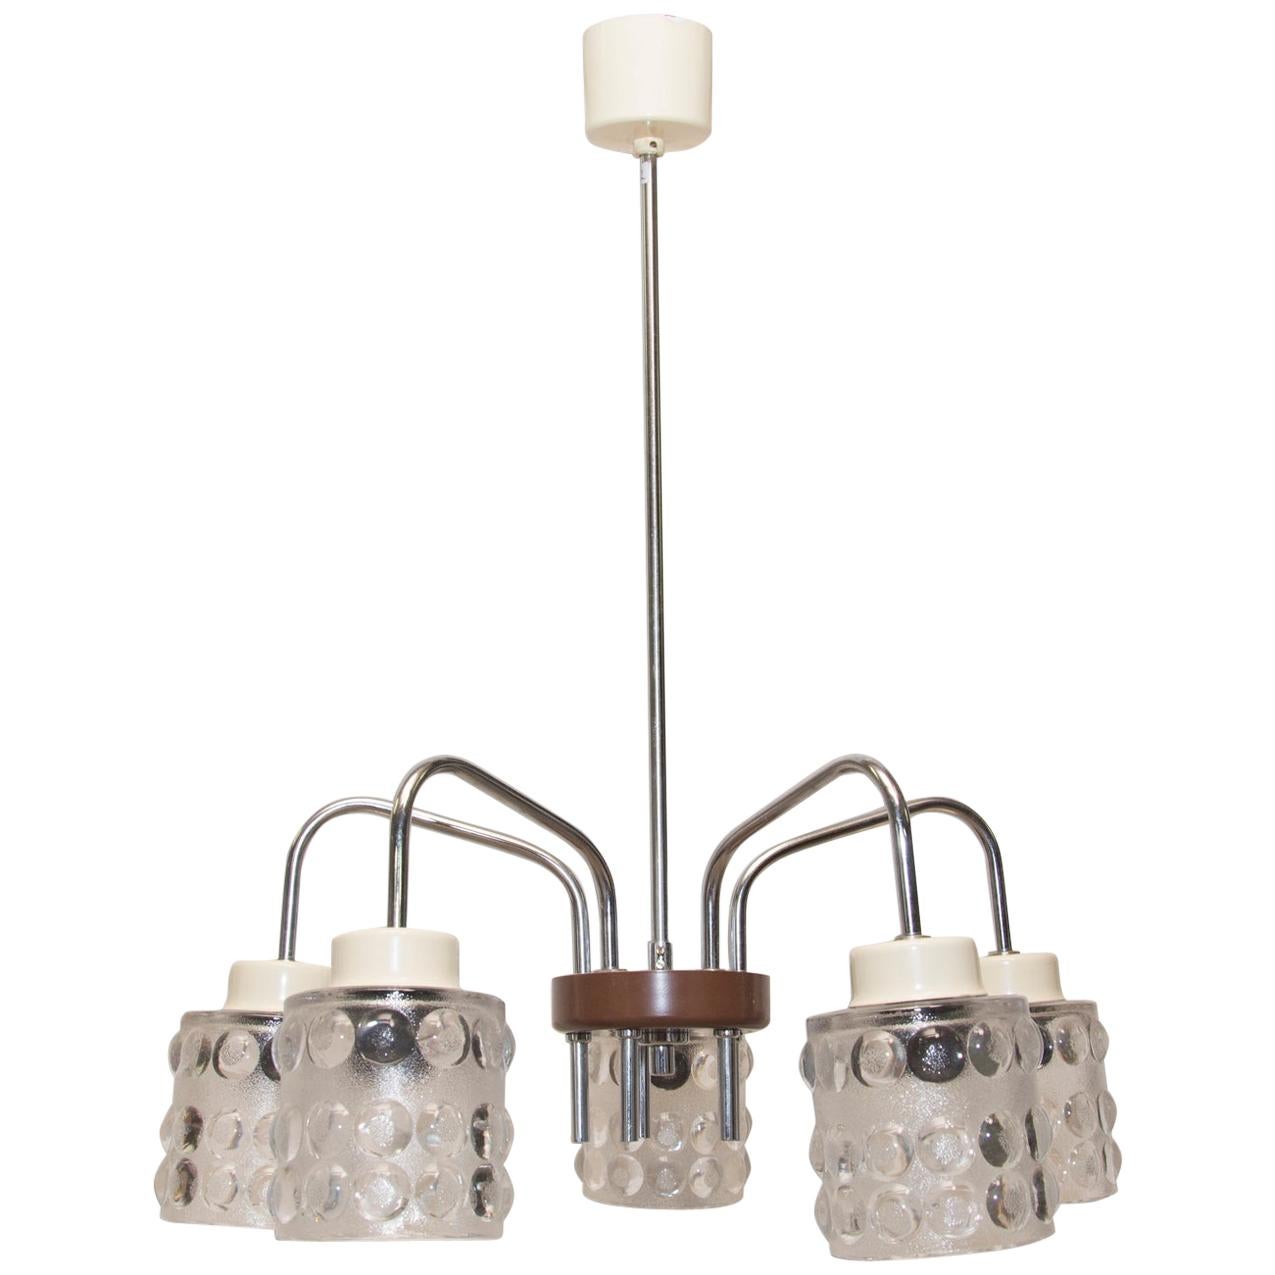 Midcentury Pendant with Five Cut-Glass Lampshades, Lidokov, 1960s For Sale